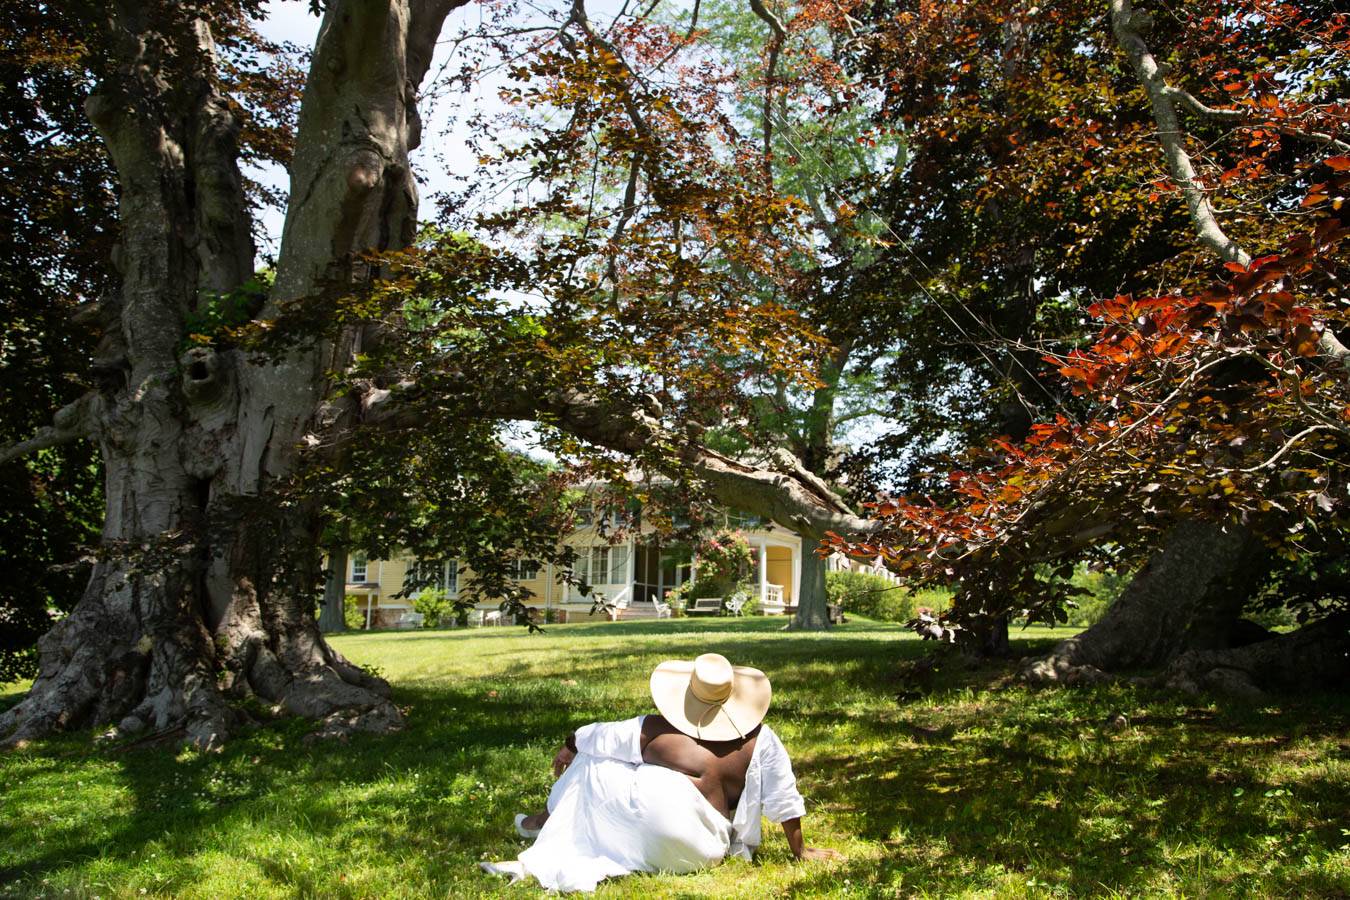 Picture of woman in white dress and hat from the back sitting in woods looking at a yellow house